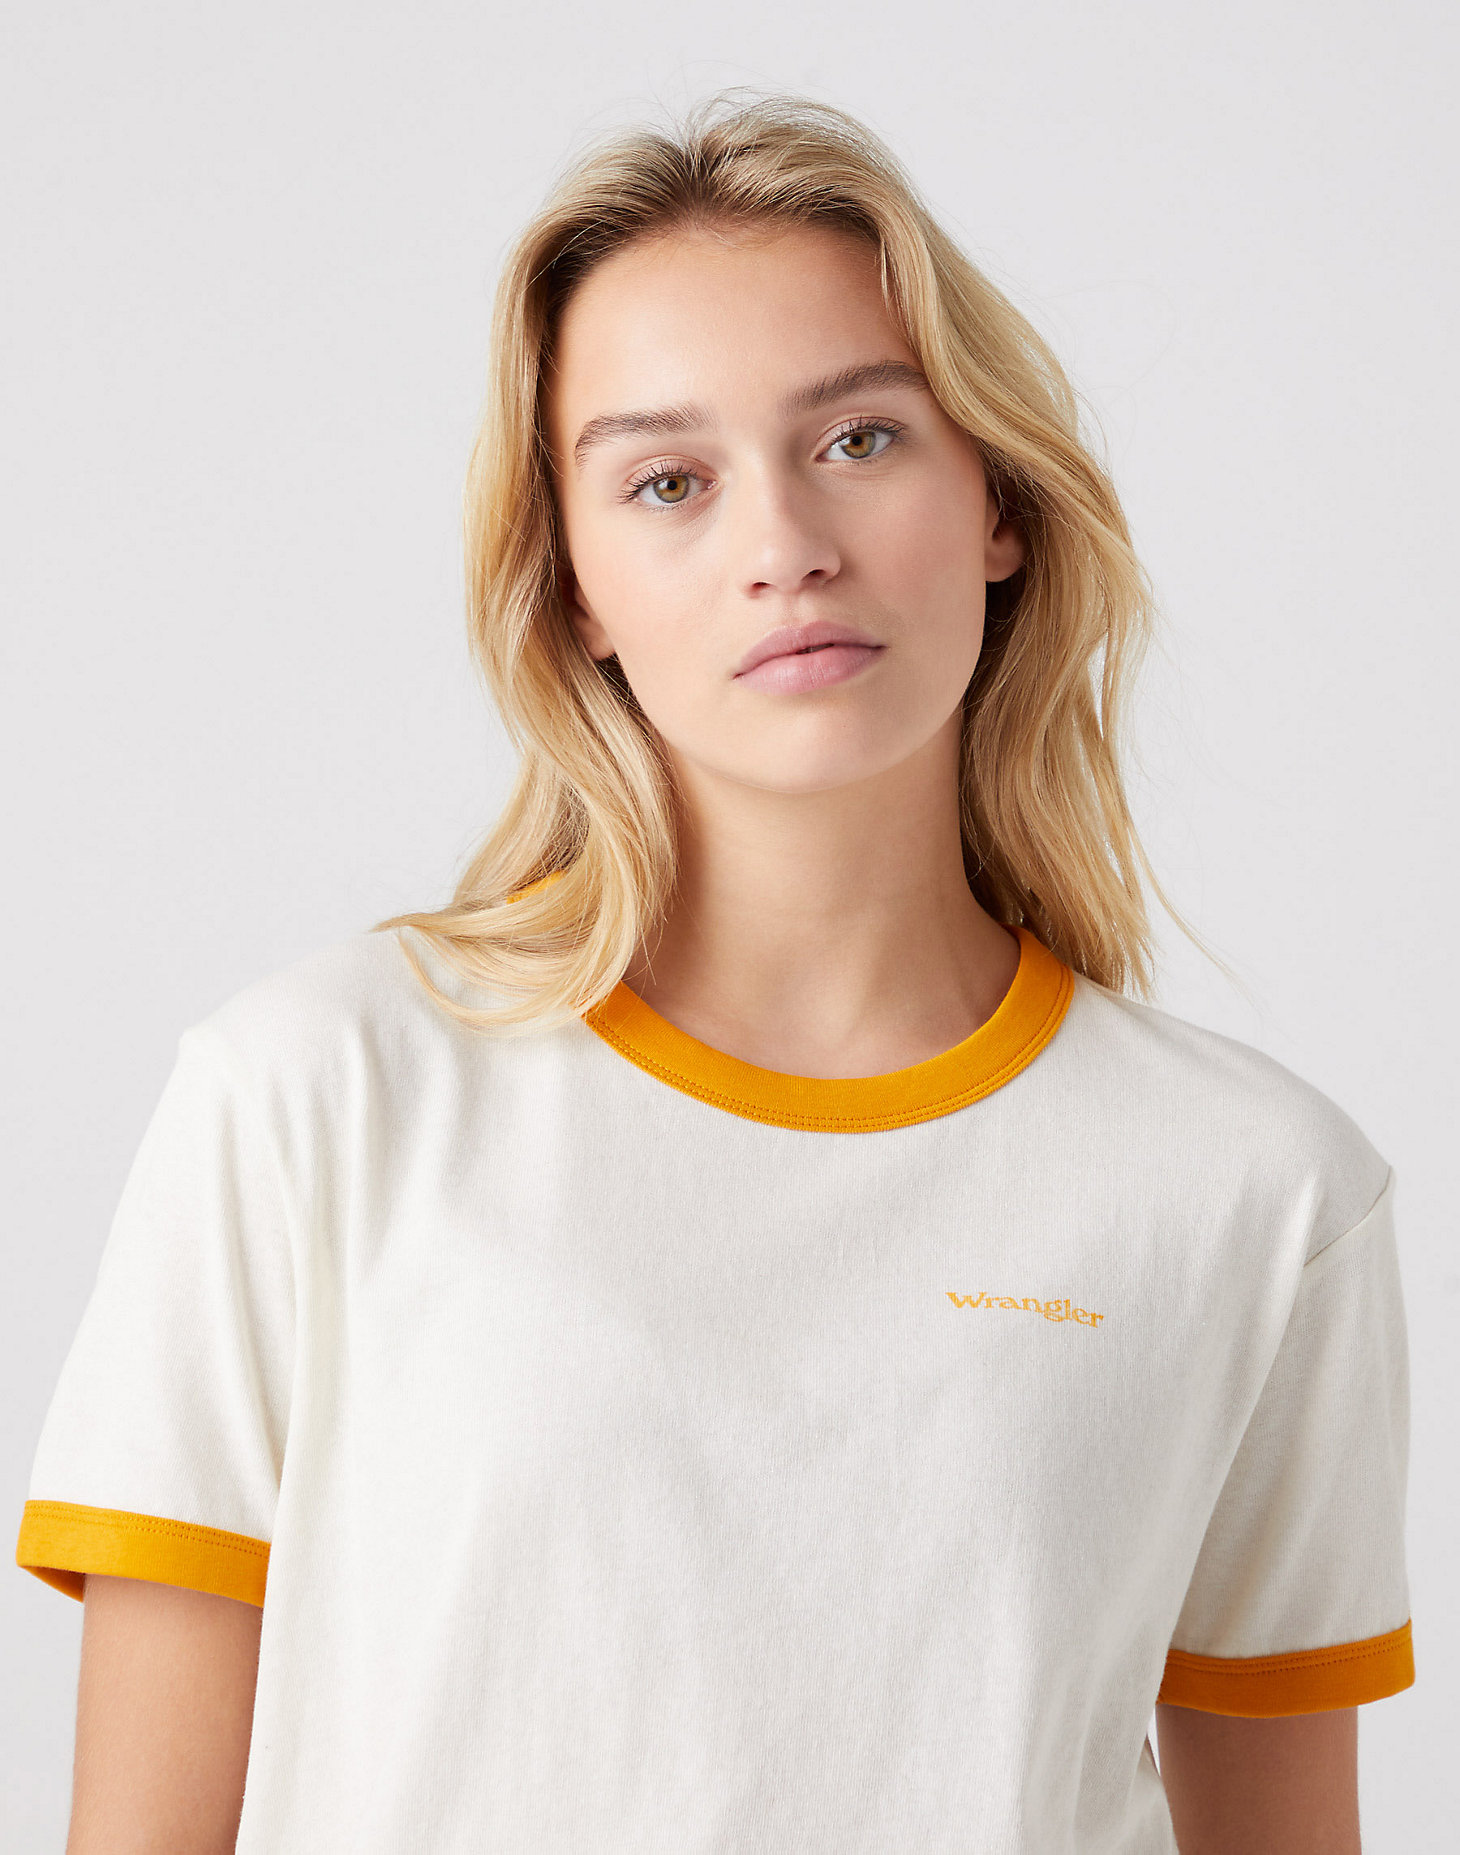 Relaxed Ringer Tee in Vanilla Ice alternative view 3